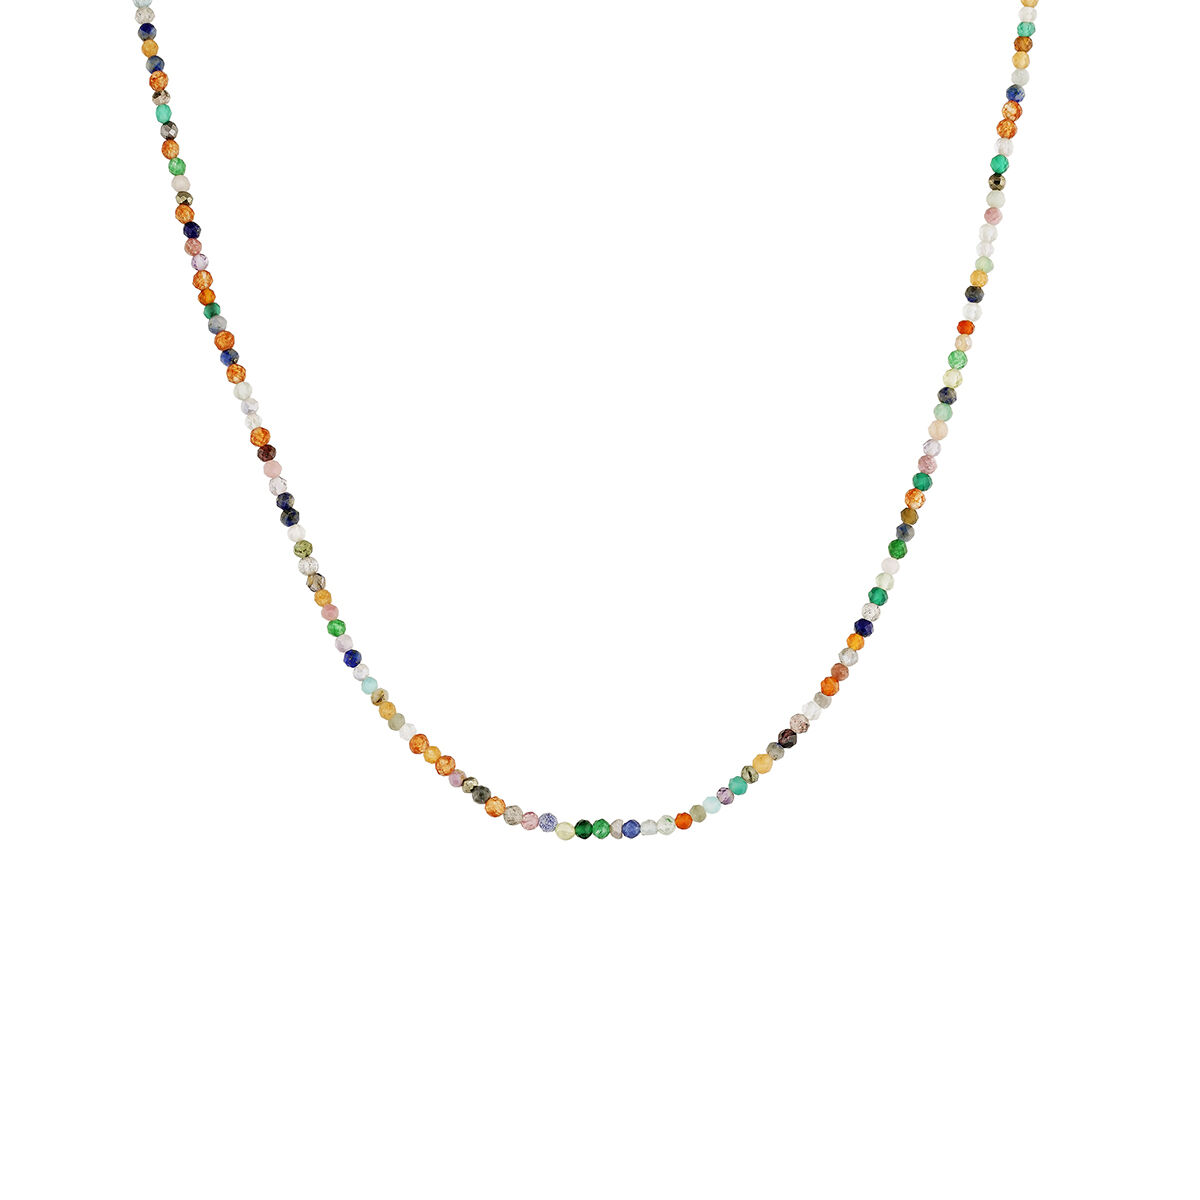 Gold plated silver colored stones necklace , J04877-02-MULTI, hi-res